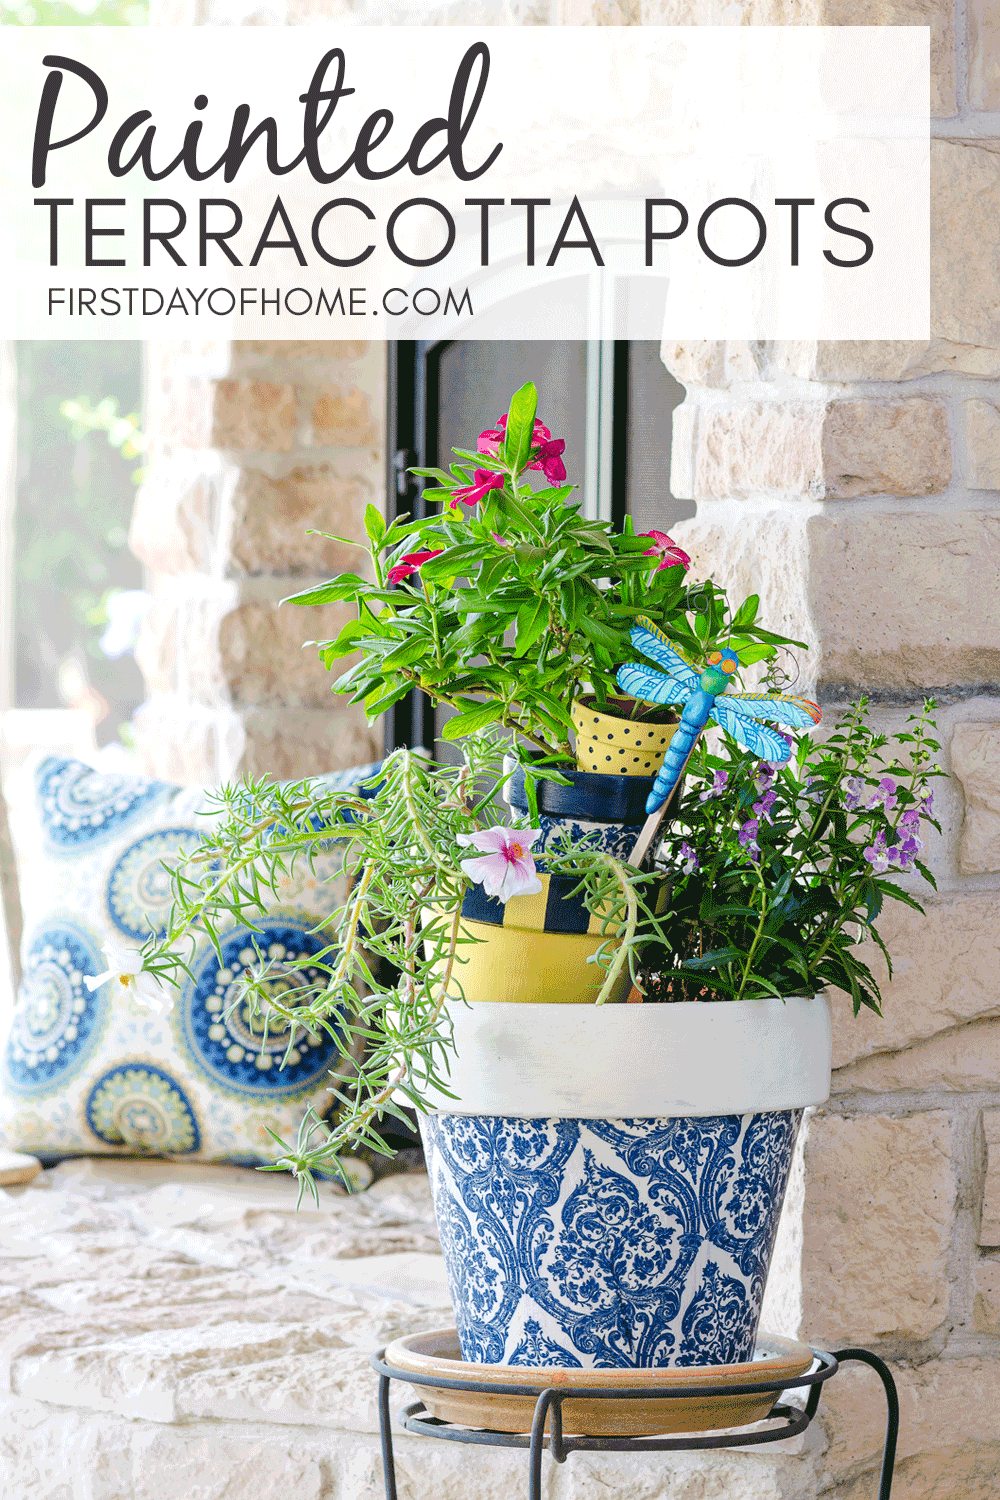 Painting Terracotta Pots Like The Pros, How To Paint Outdoor Ceramic Pots